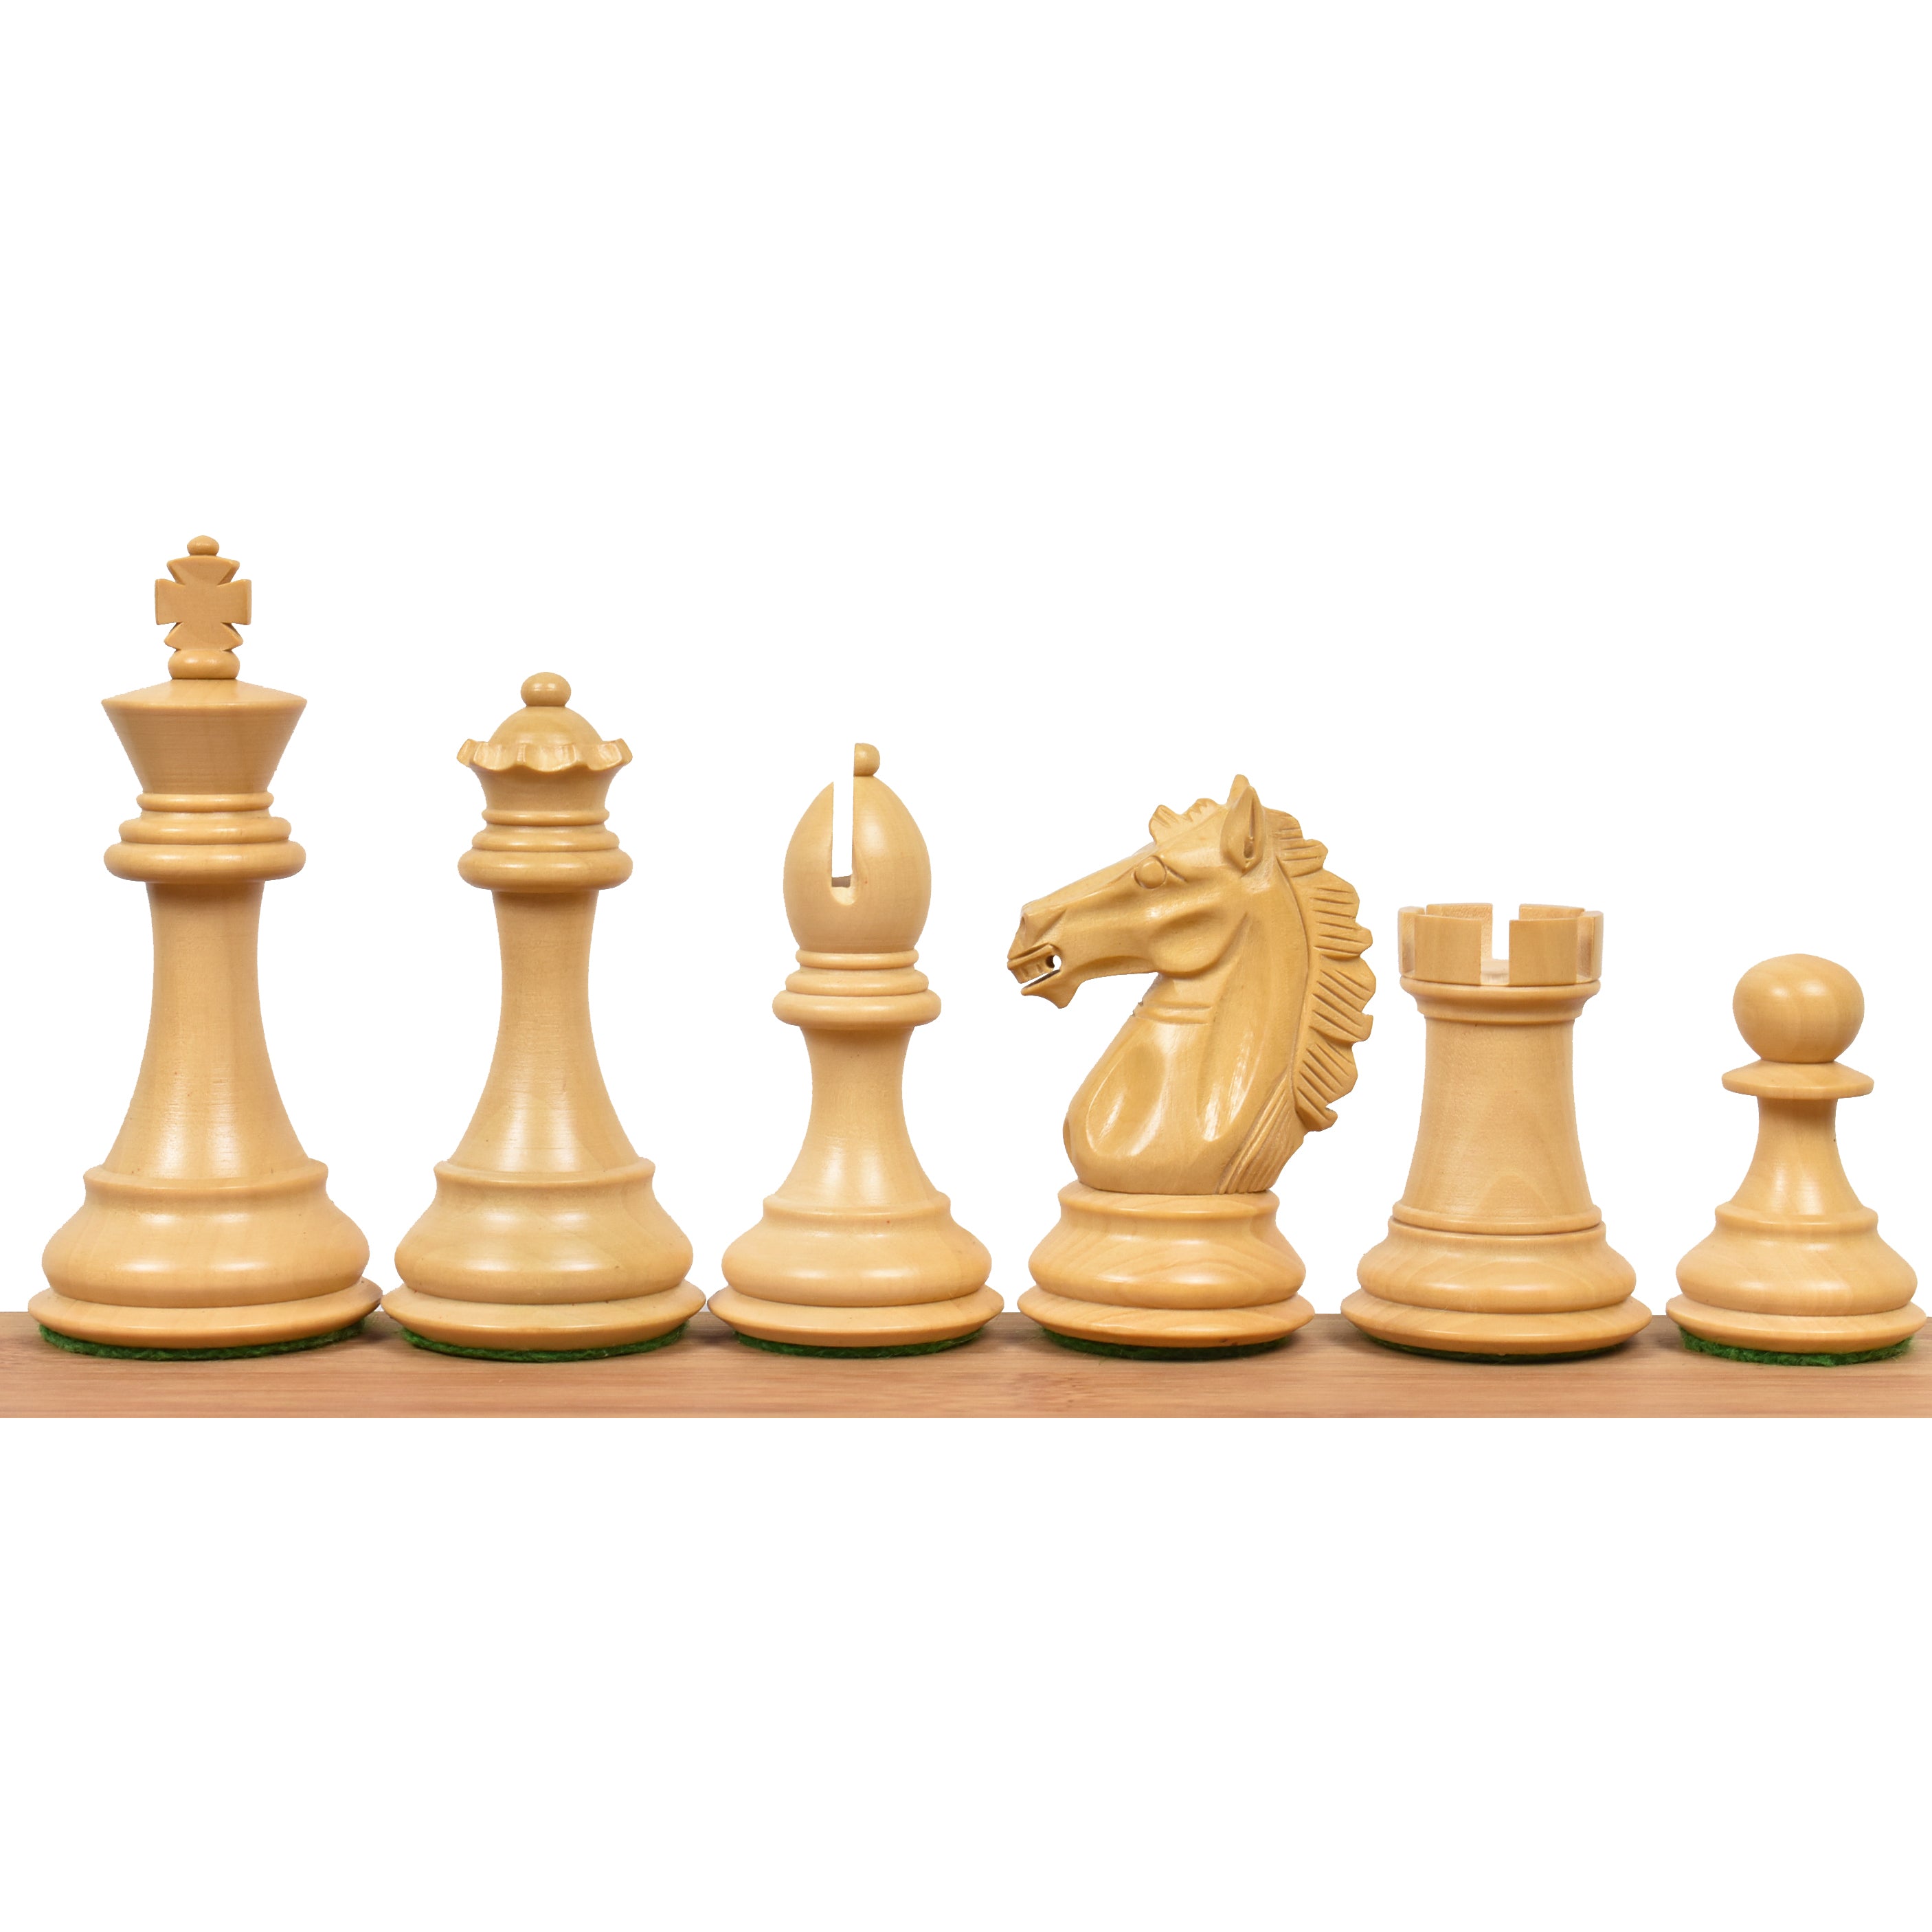 Slightly Imperfect 3.9" Exclusive Alban Staunton Chess Pieces Only set